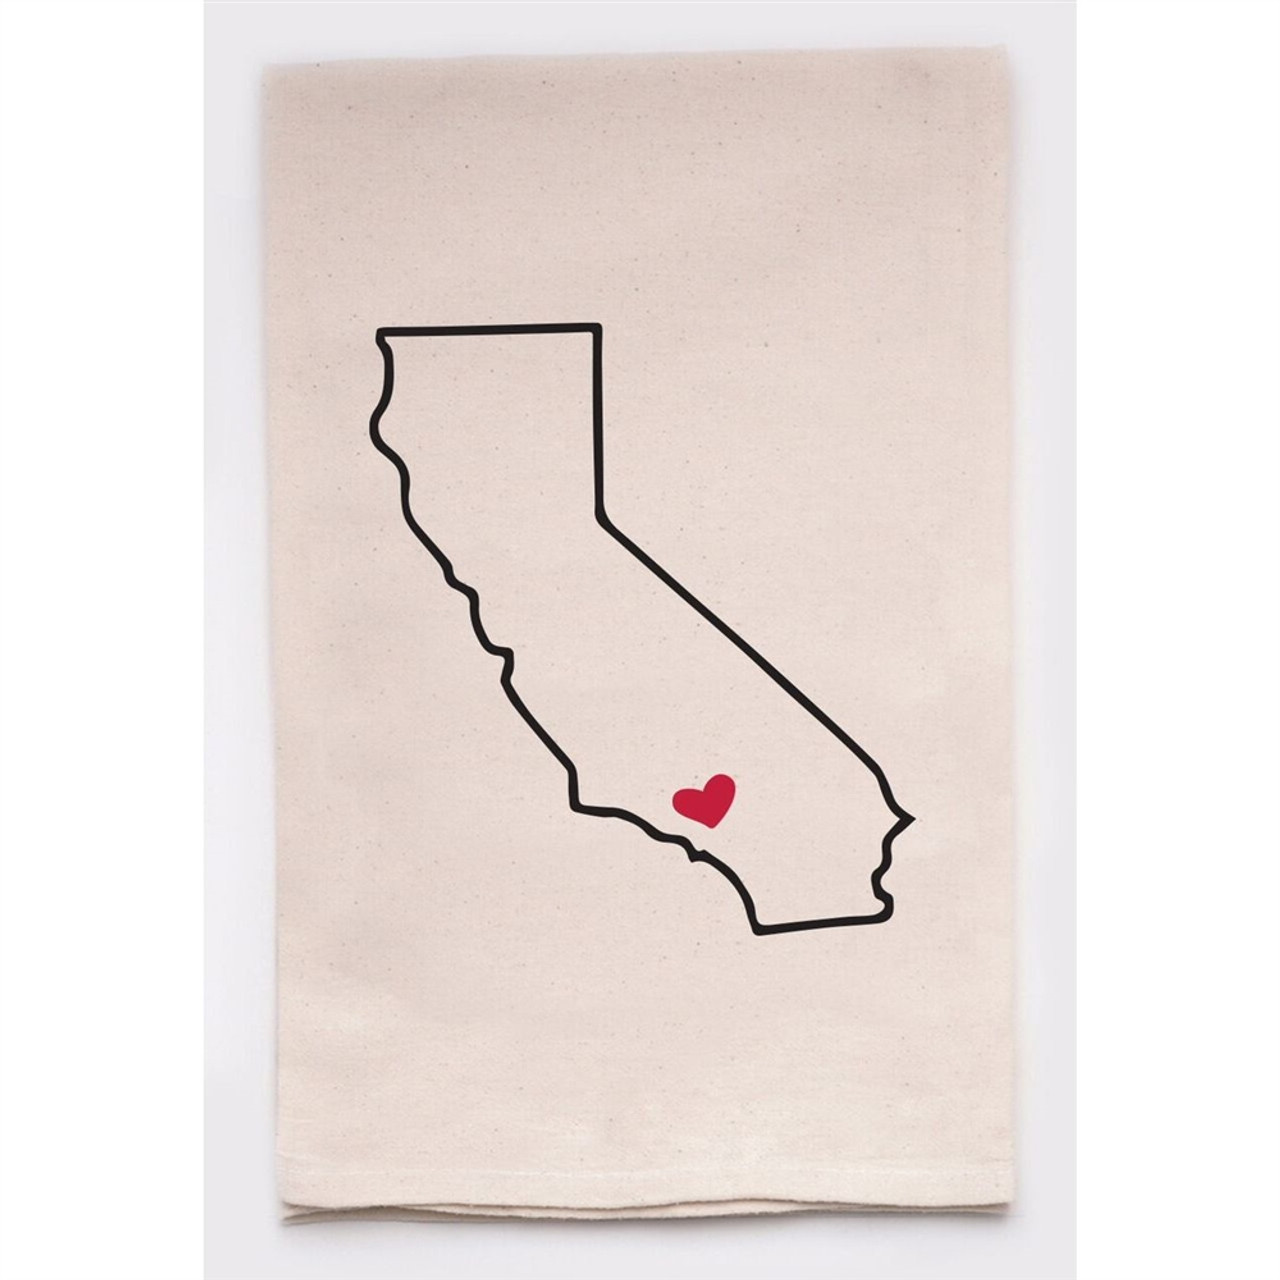 Housewarming Gifts - Tea Towels by State - Choose Your State!